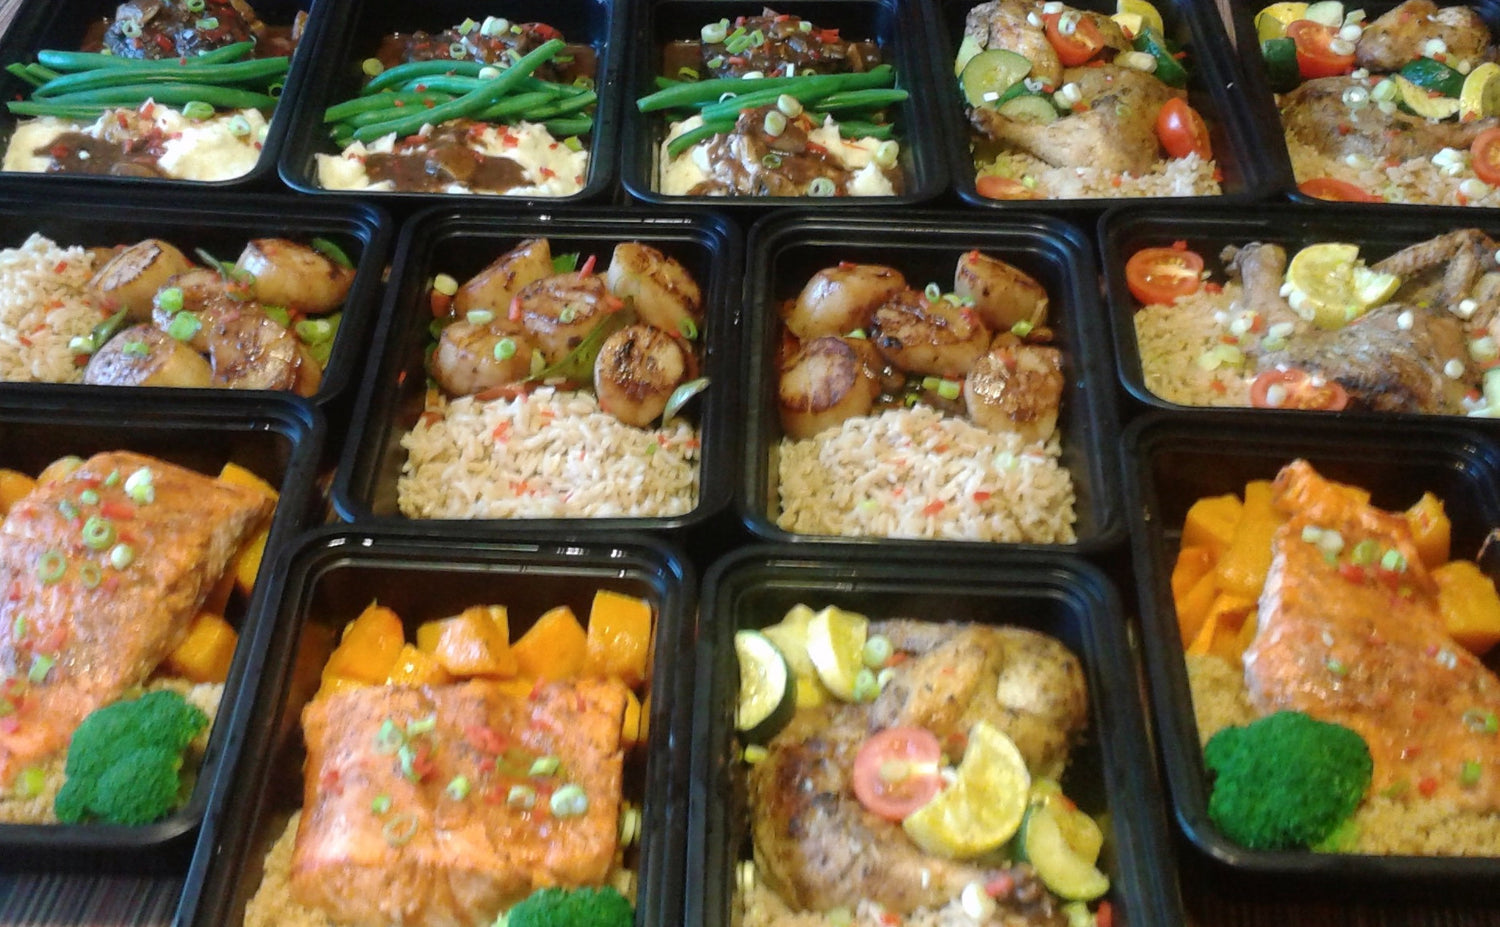 Chef prepared Meals Delivered. Serving Maryland, Northern Virginia, and Washington D.C. We offer healthy, fully cooked, and gourmet meals delivered to your door.